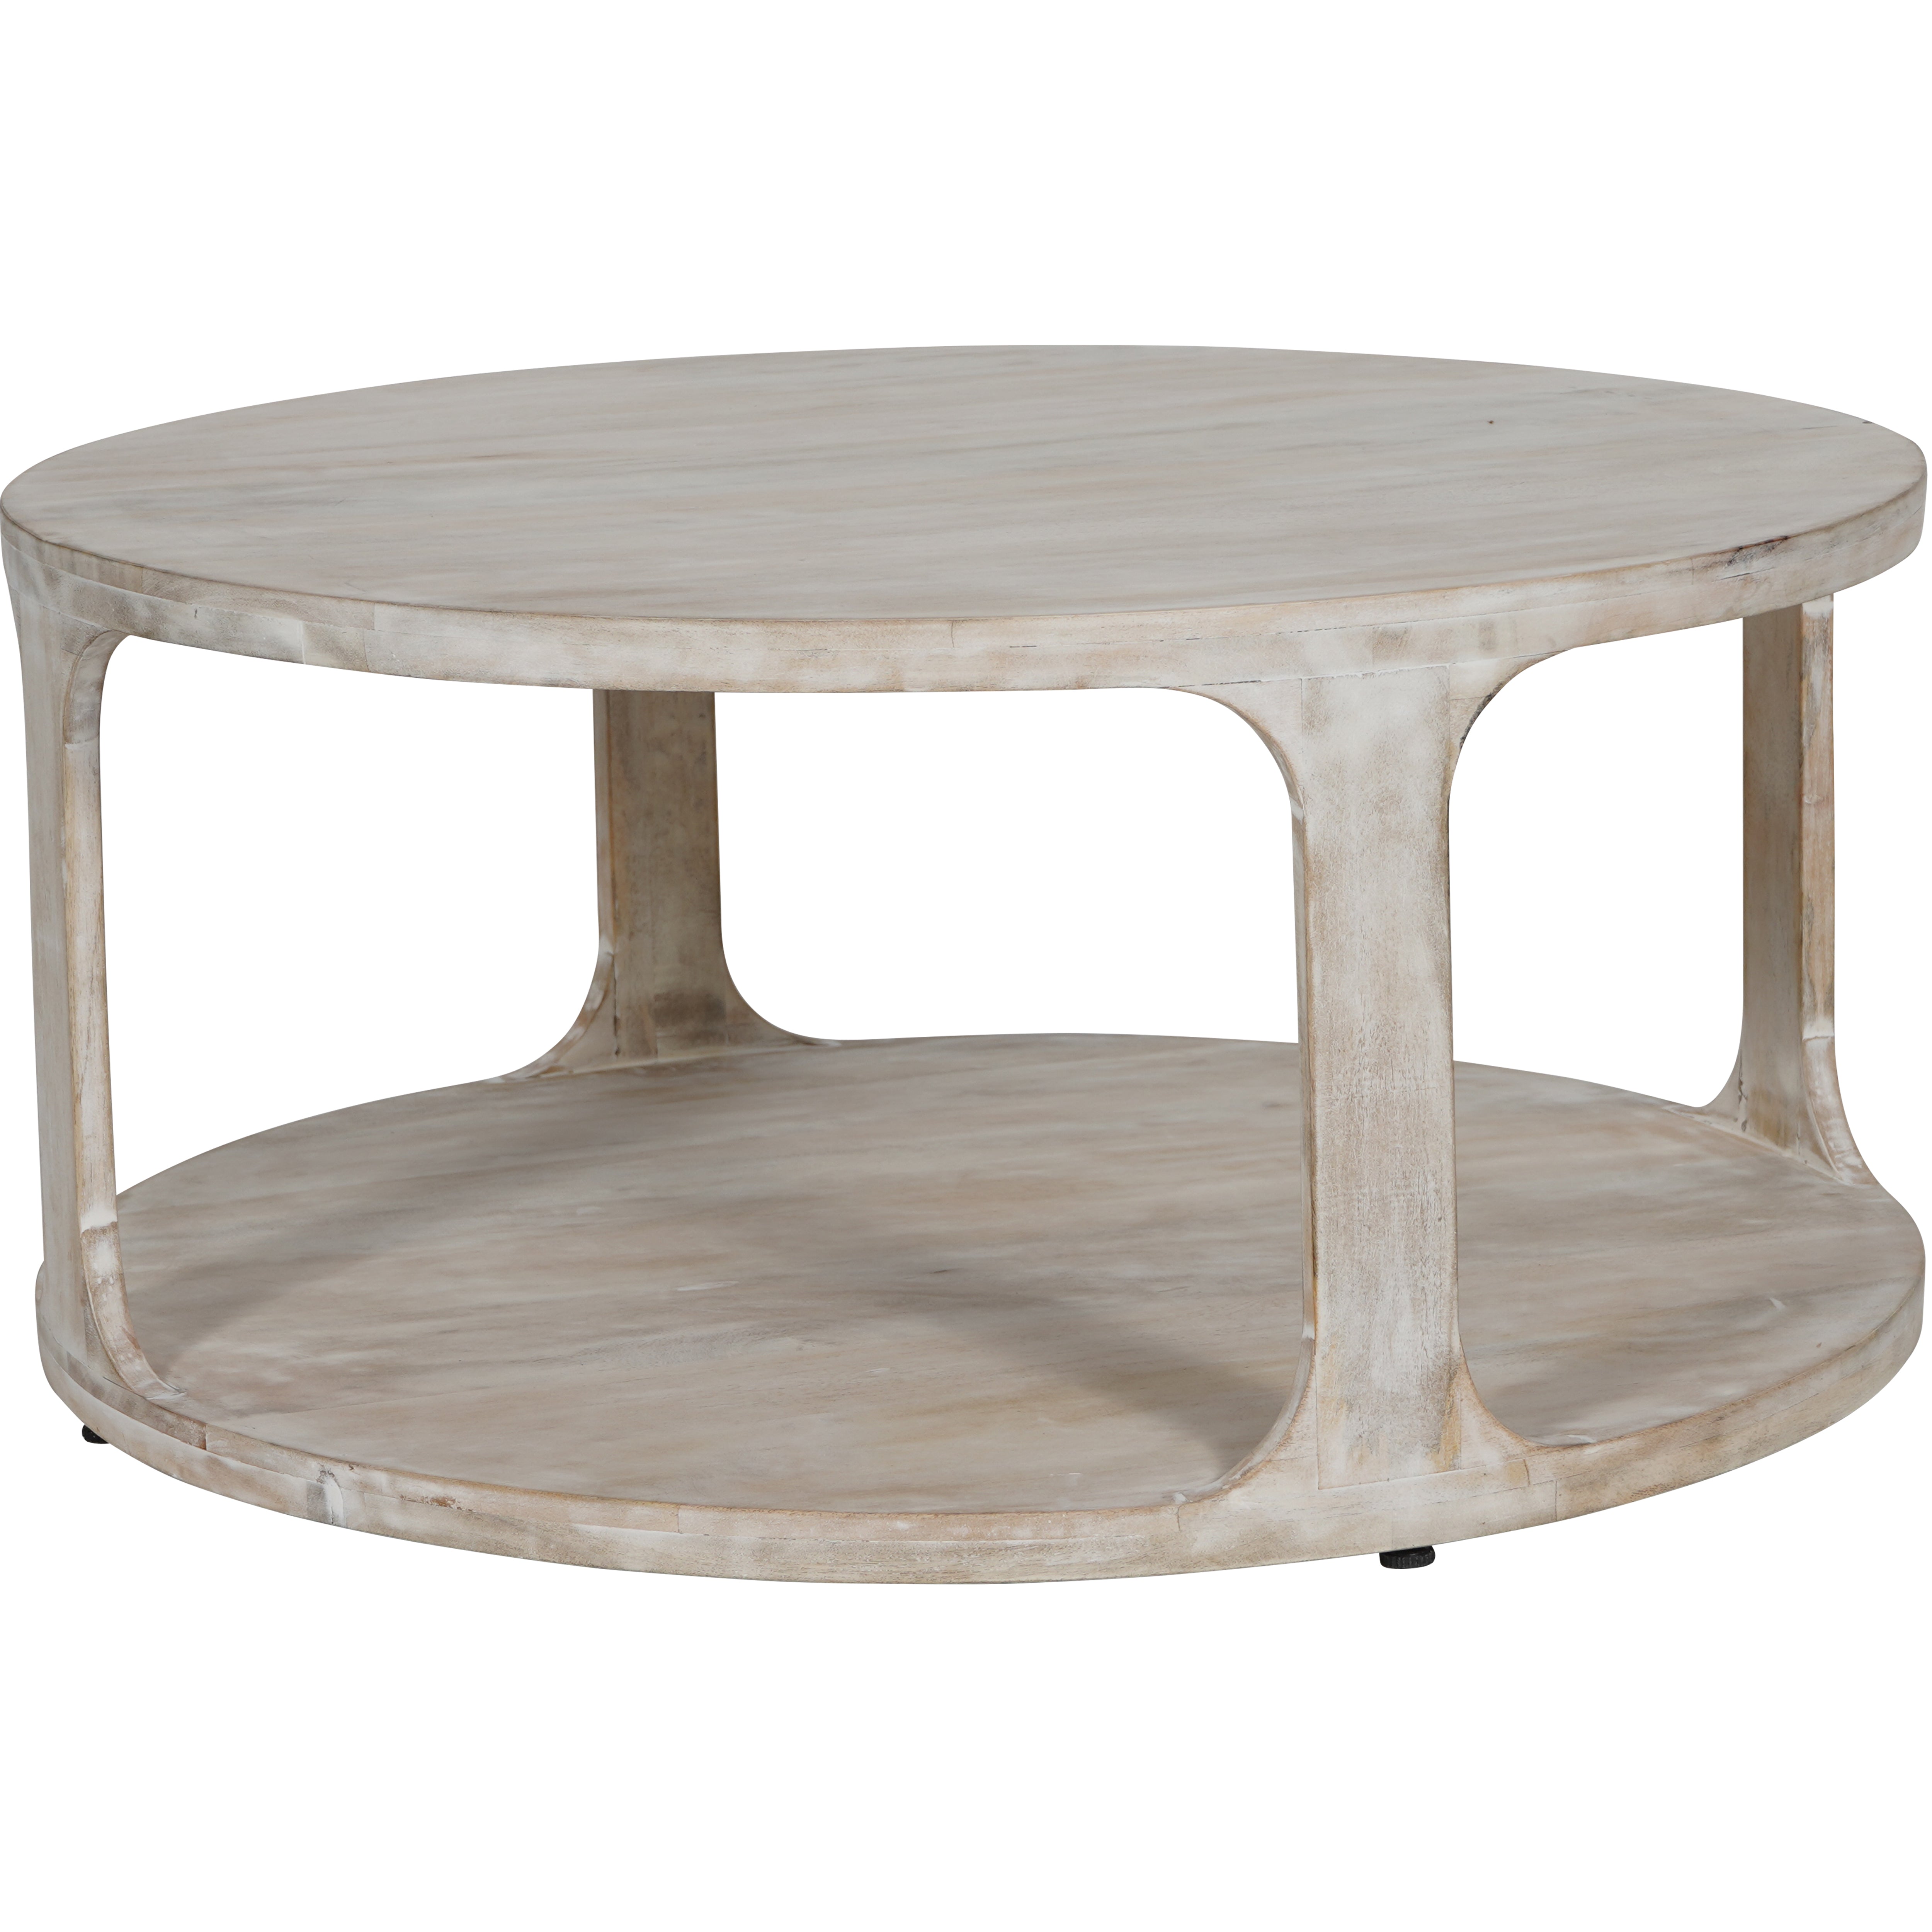 Bamburgh Solid Carved Wooden Coffee Table in Whitewash Finish